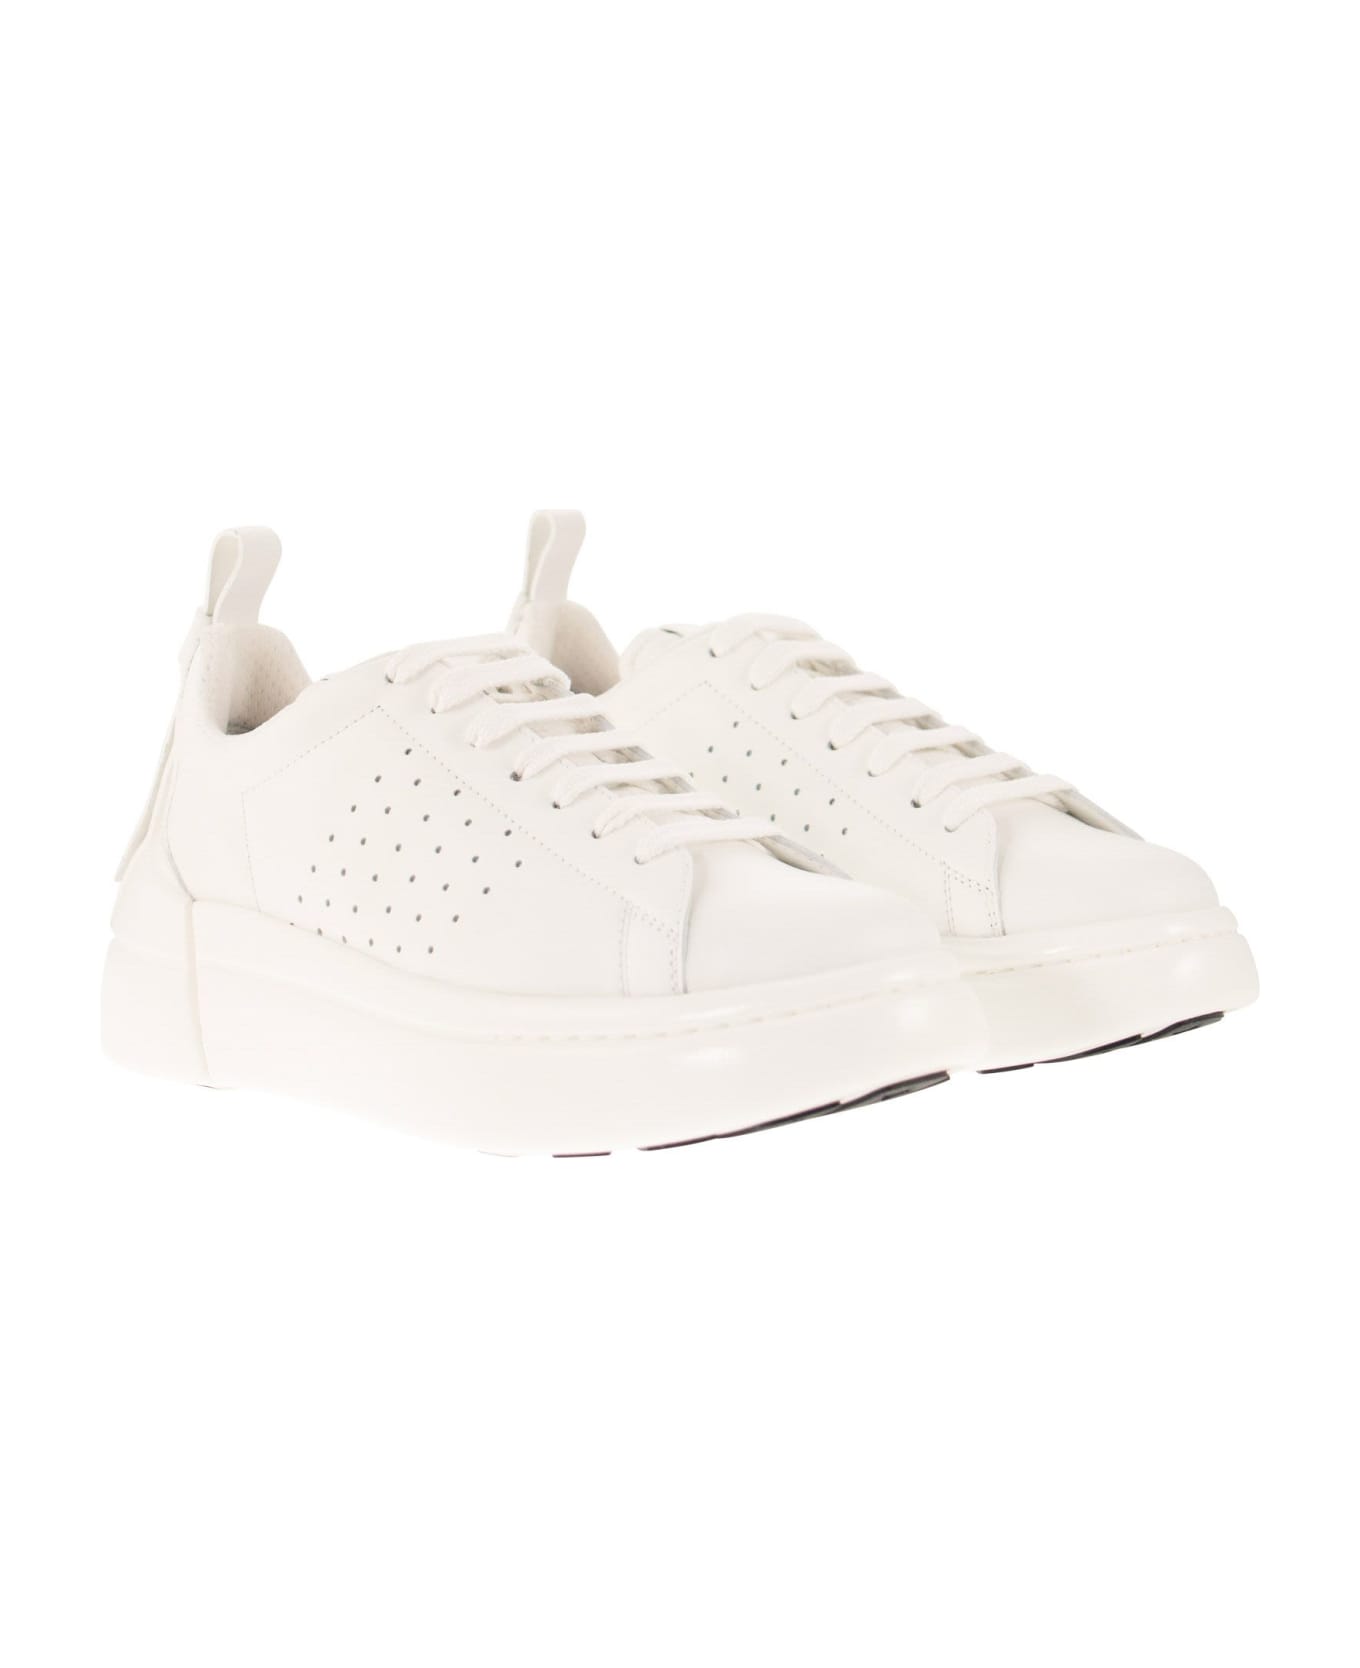 RED Valentino Sneakers Bowalk - White